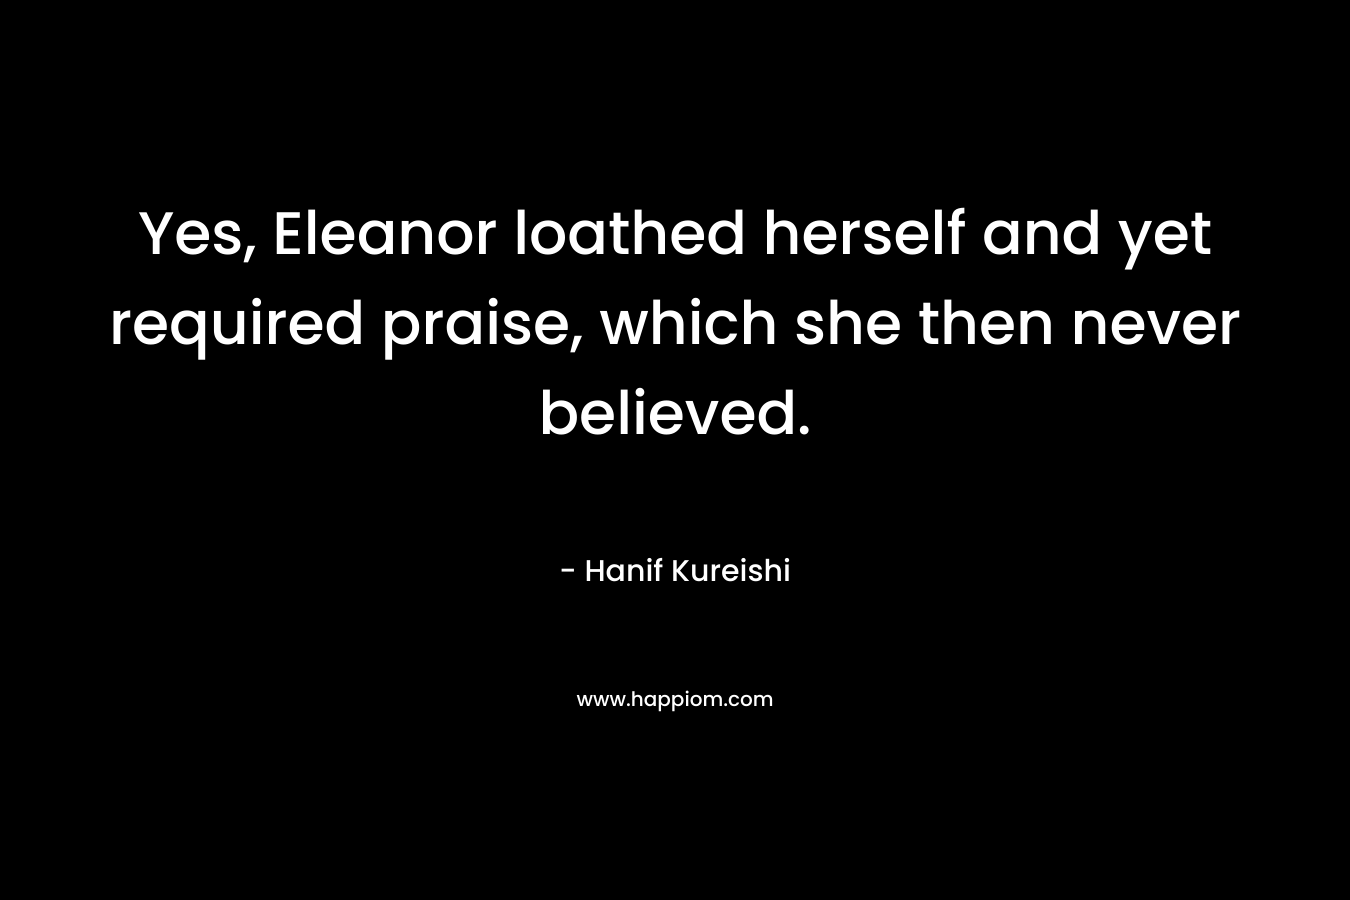 Yes, Eleanor loathed herself and yet required praise, which she then never believed. – Hanif Kureishi